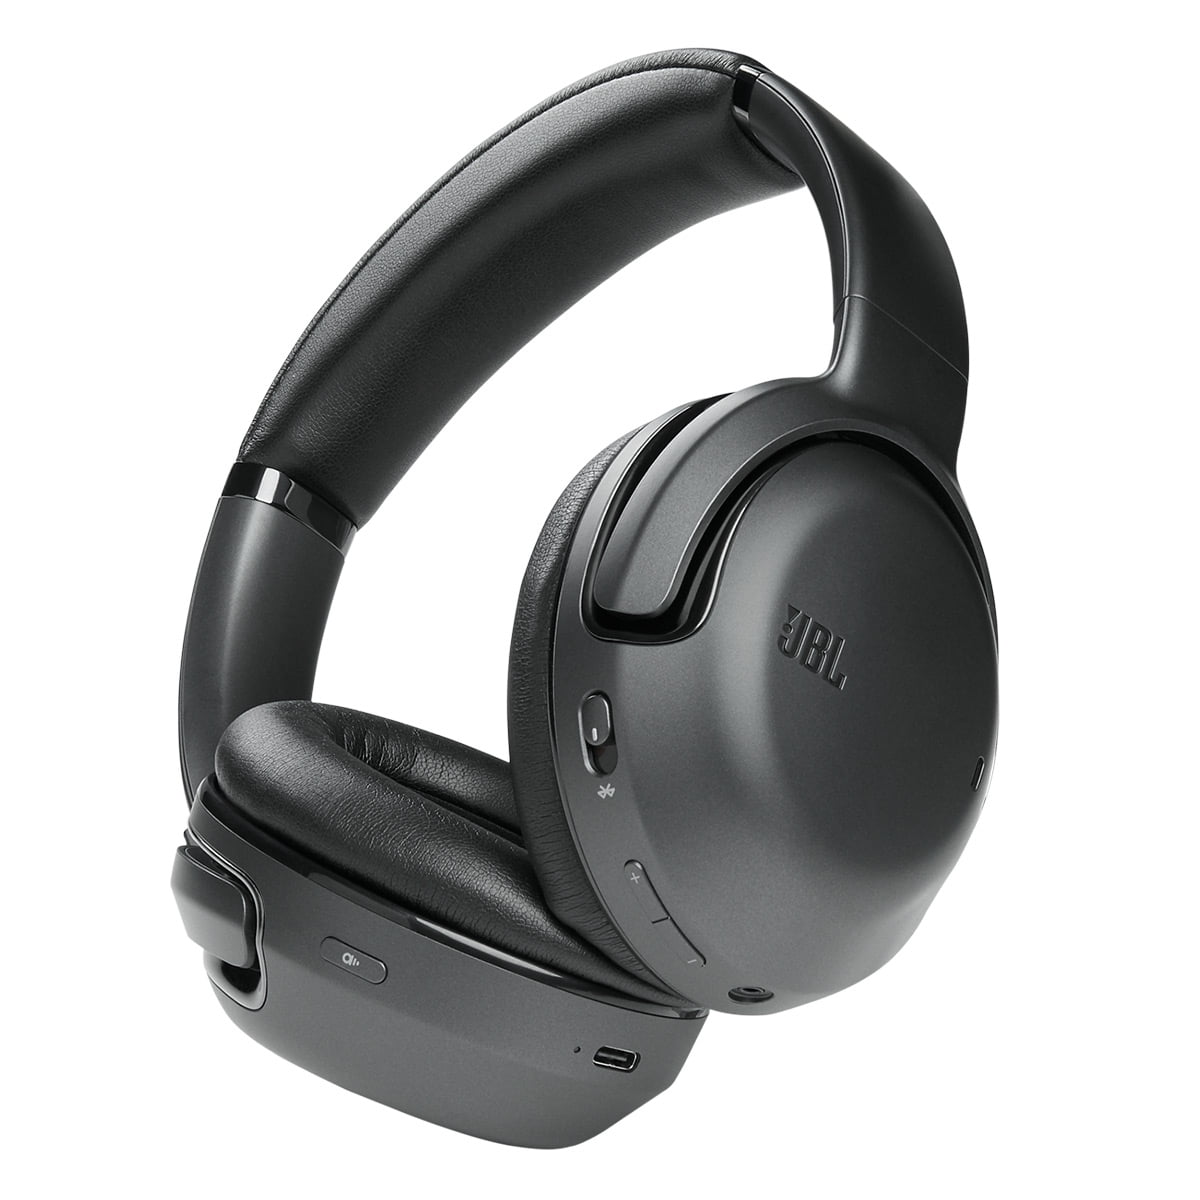 Tour Wireless JBL Noise ONE Over-Ear Headphones Bluetooth (Black) Cancelling